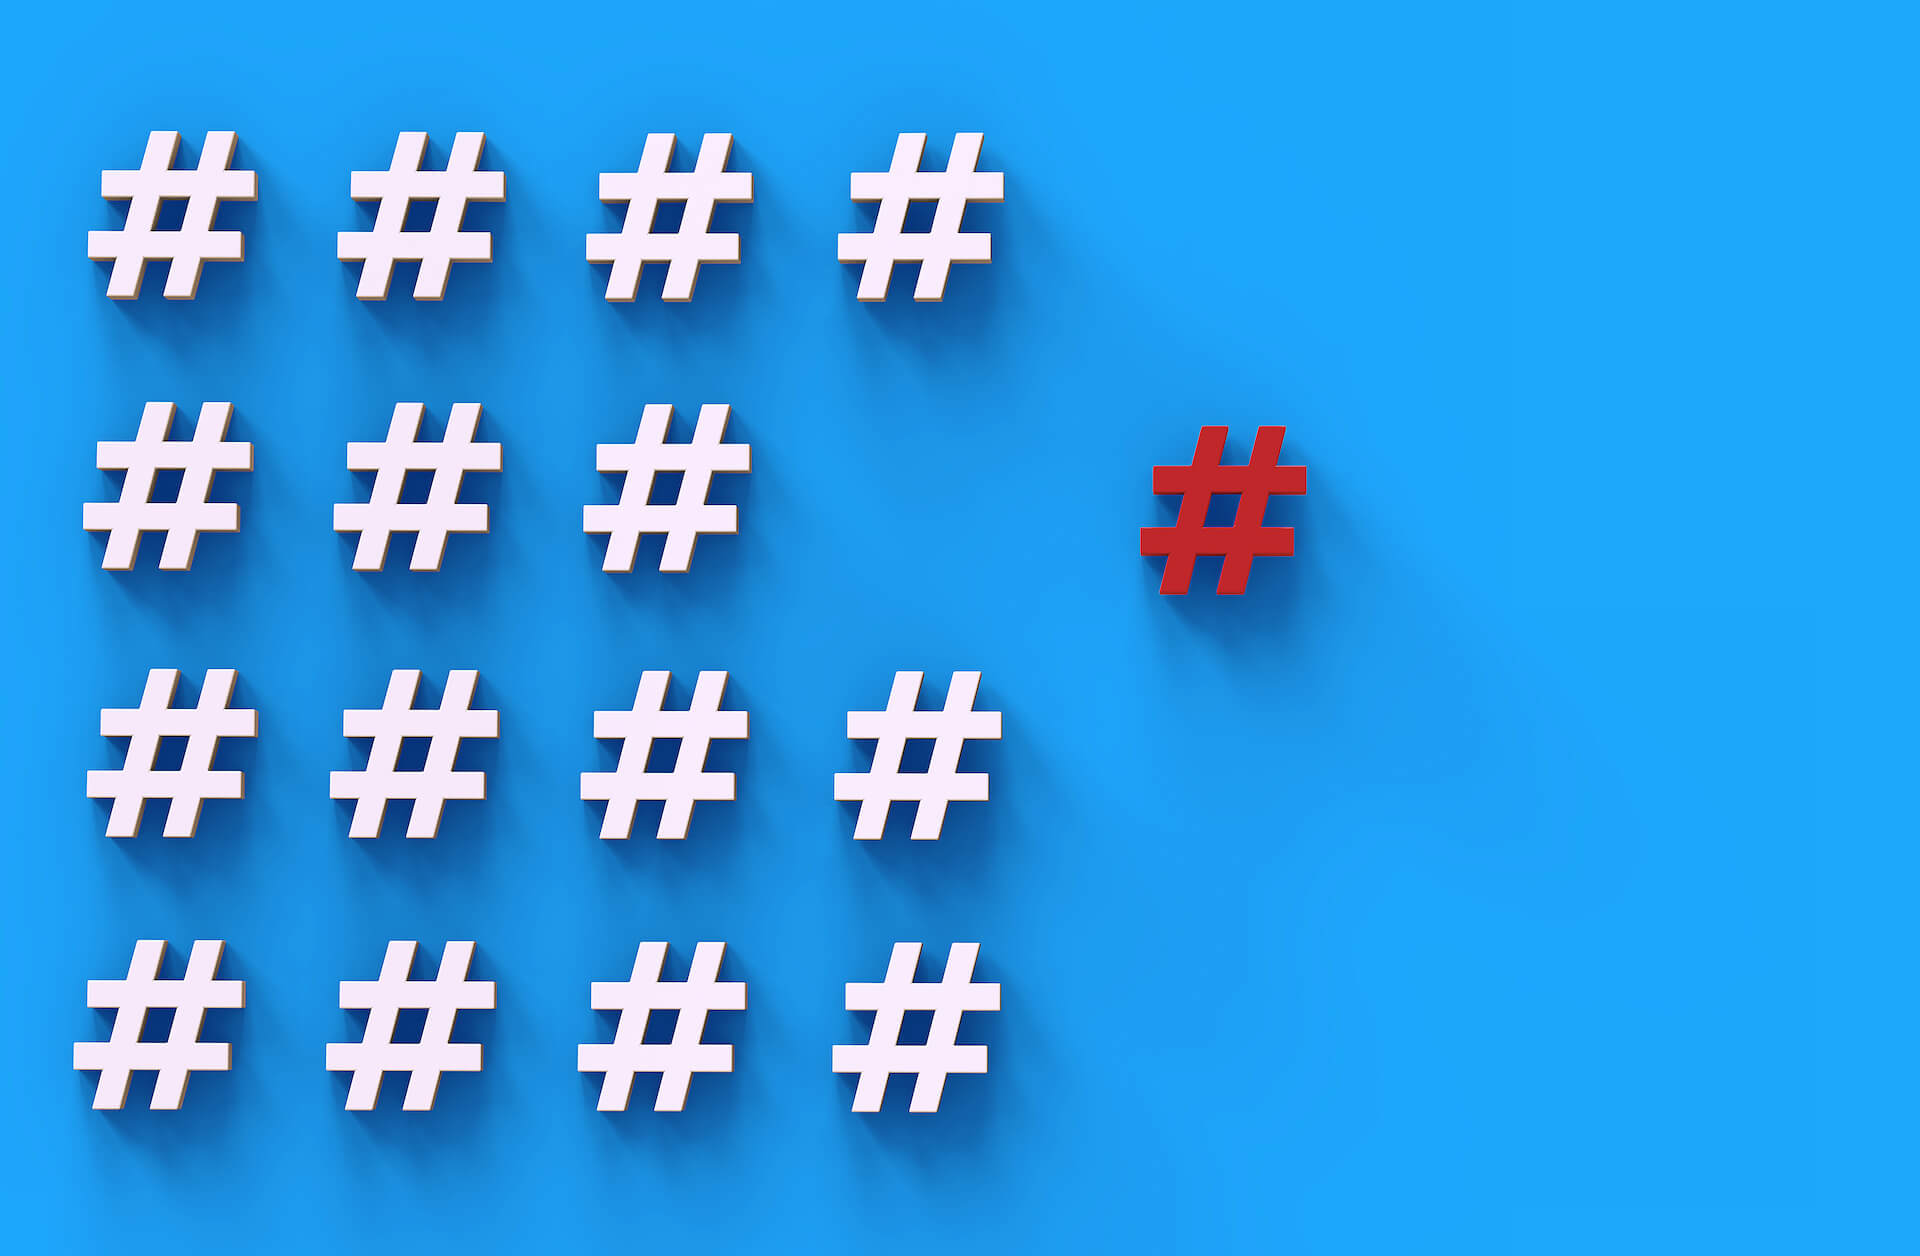 How To Promote Your Business With Hashtags?